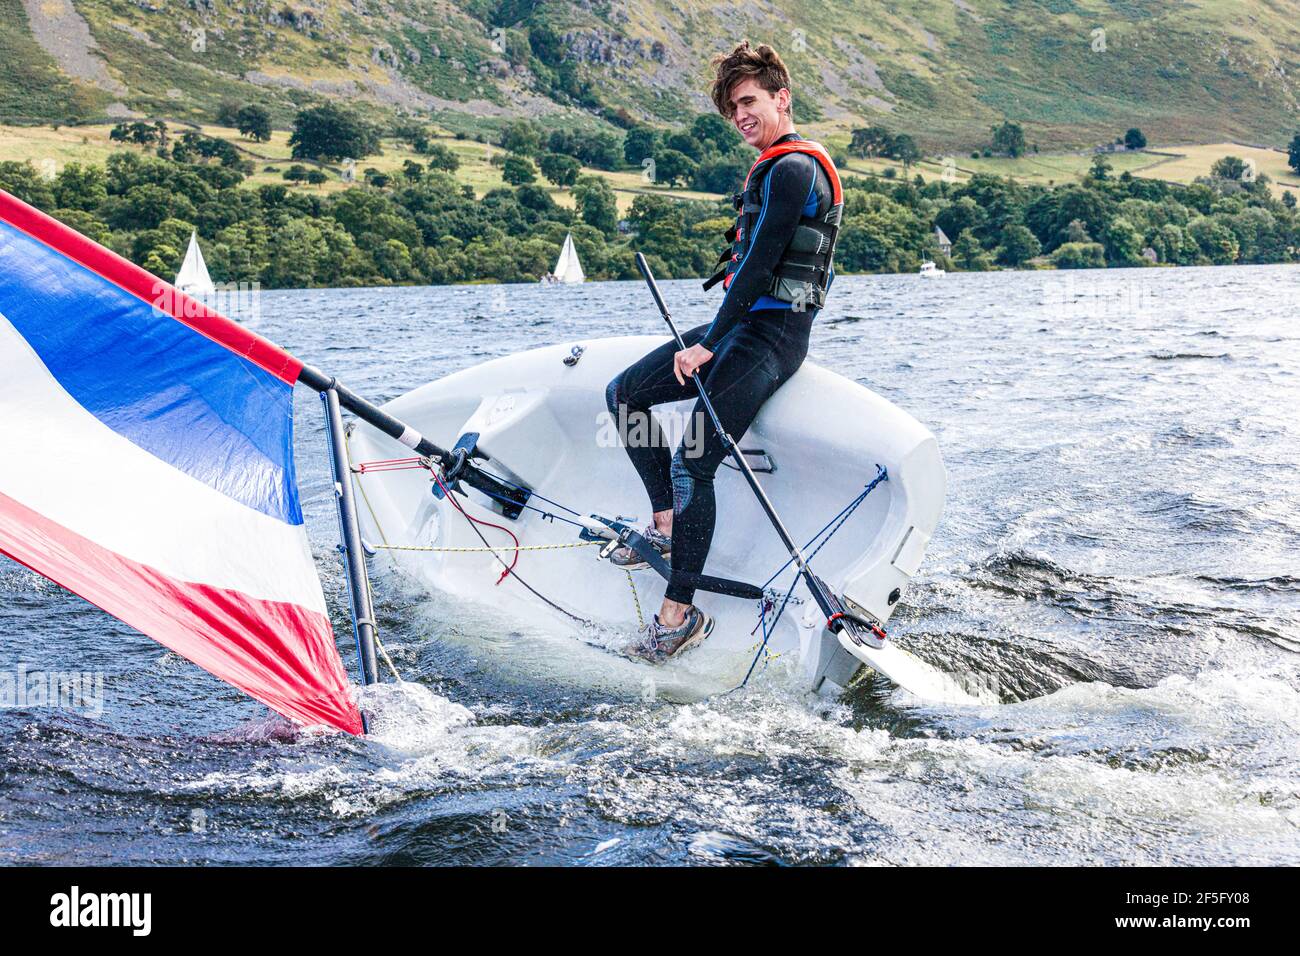 The English Lake District - Sailing on Ullswater, Cumbria UK - A young man in the process of capsizing a dinghy Stock Photo